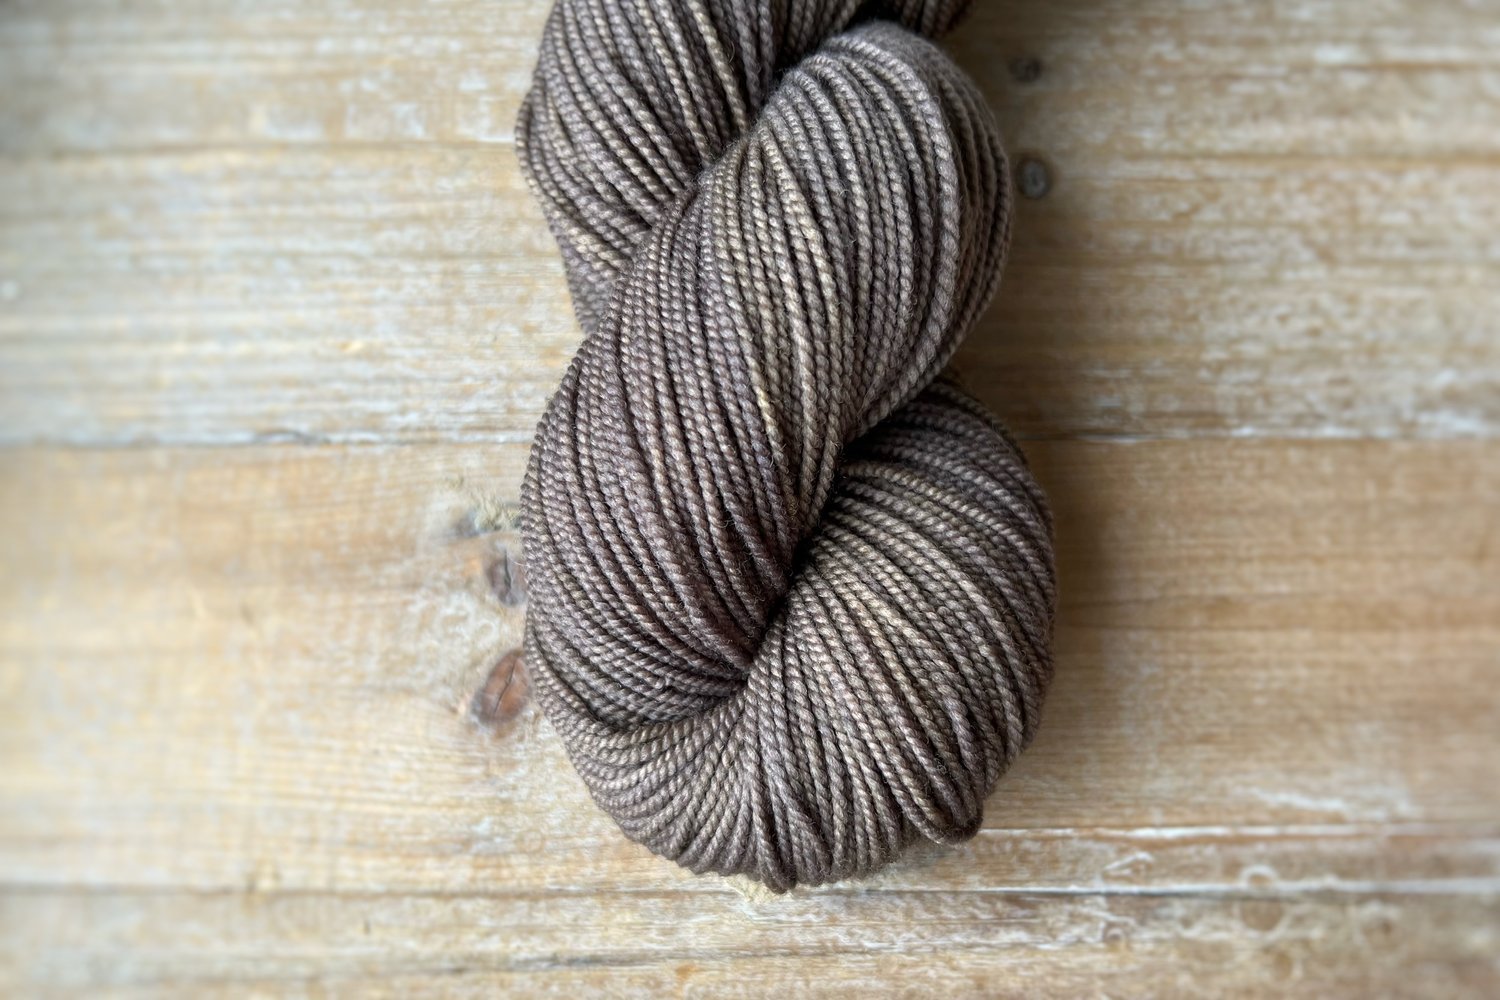 Dyed In the Skein — Magpie Fibers